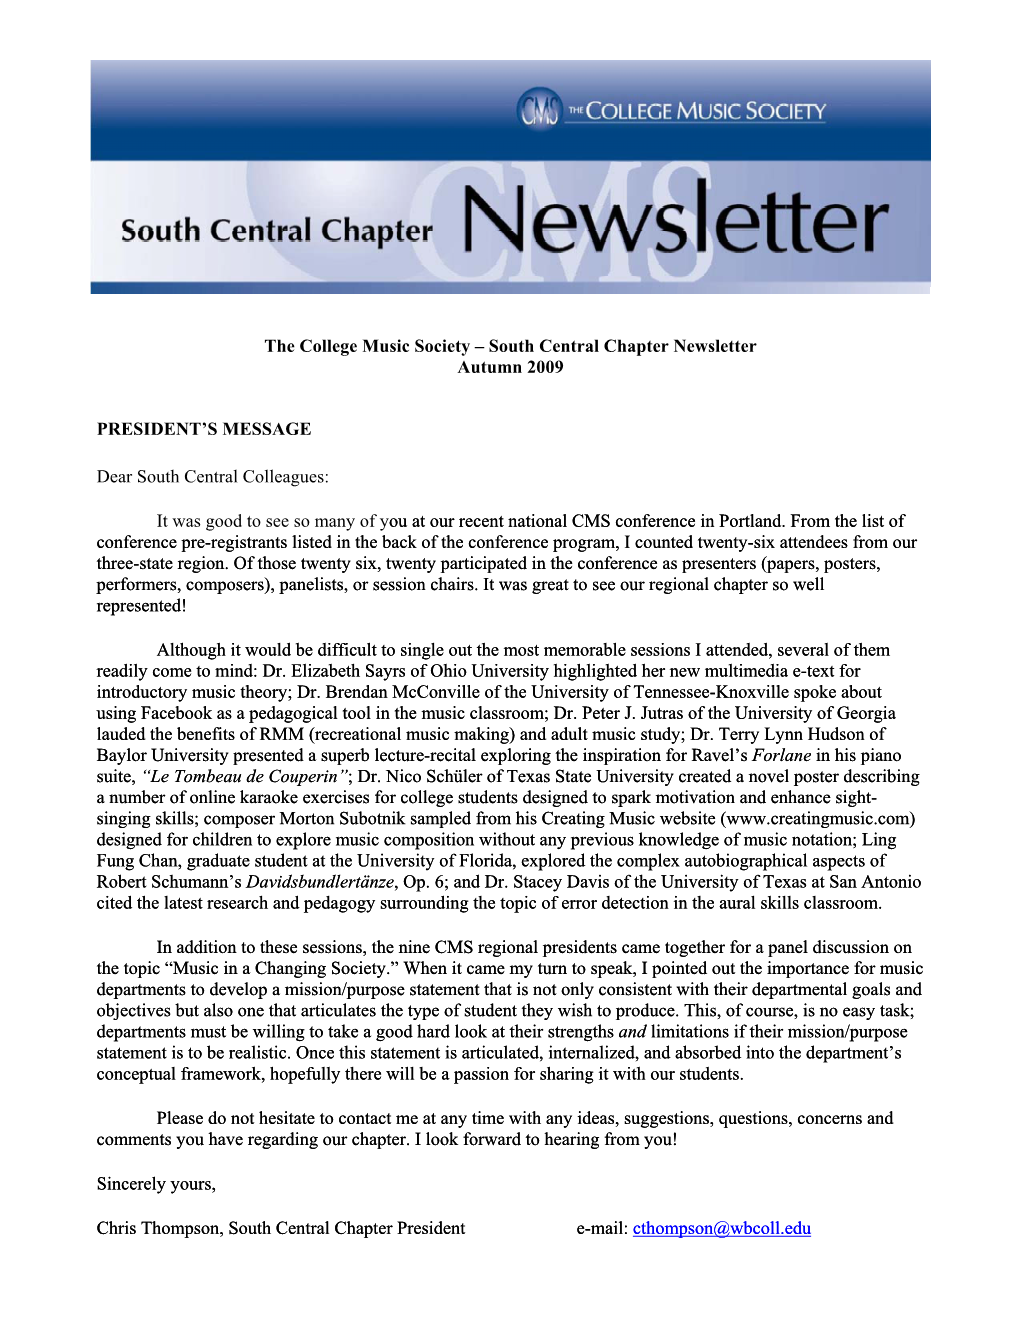 South Central Chapter Newsletter Autumn 2009